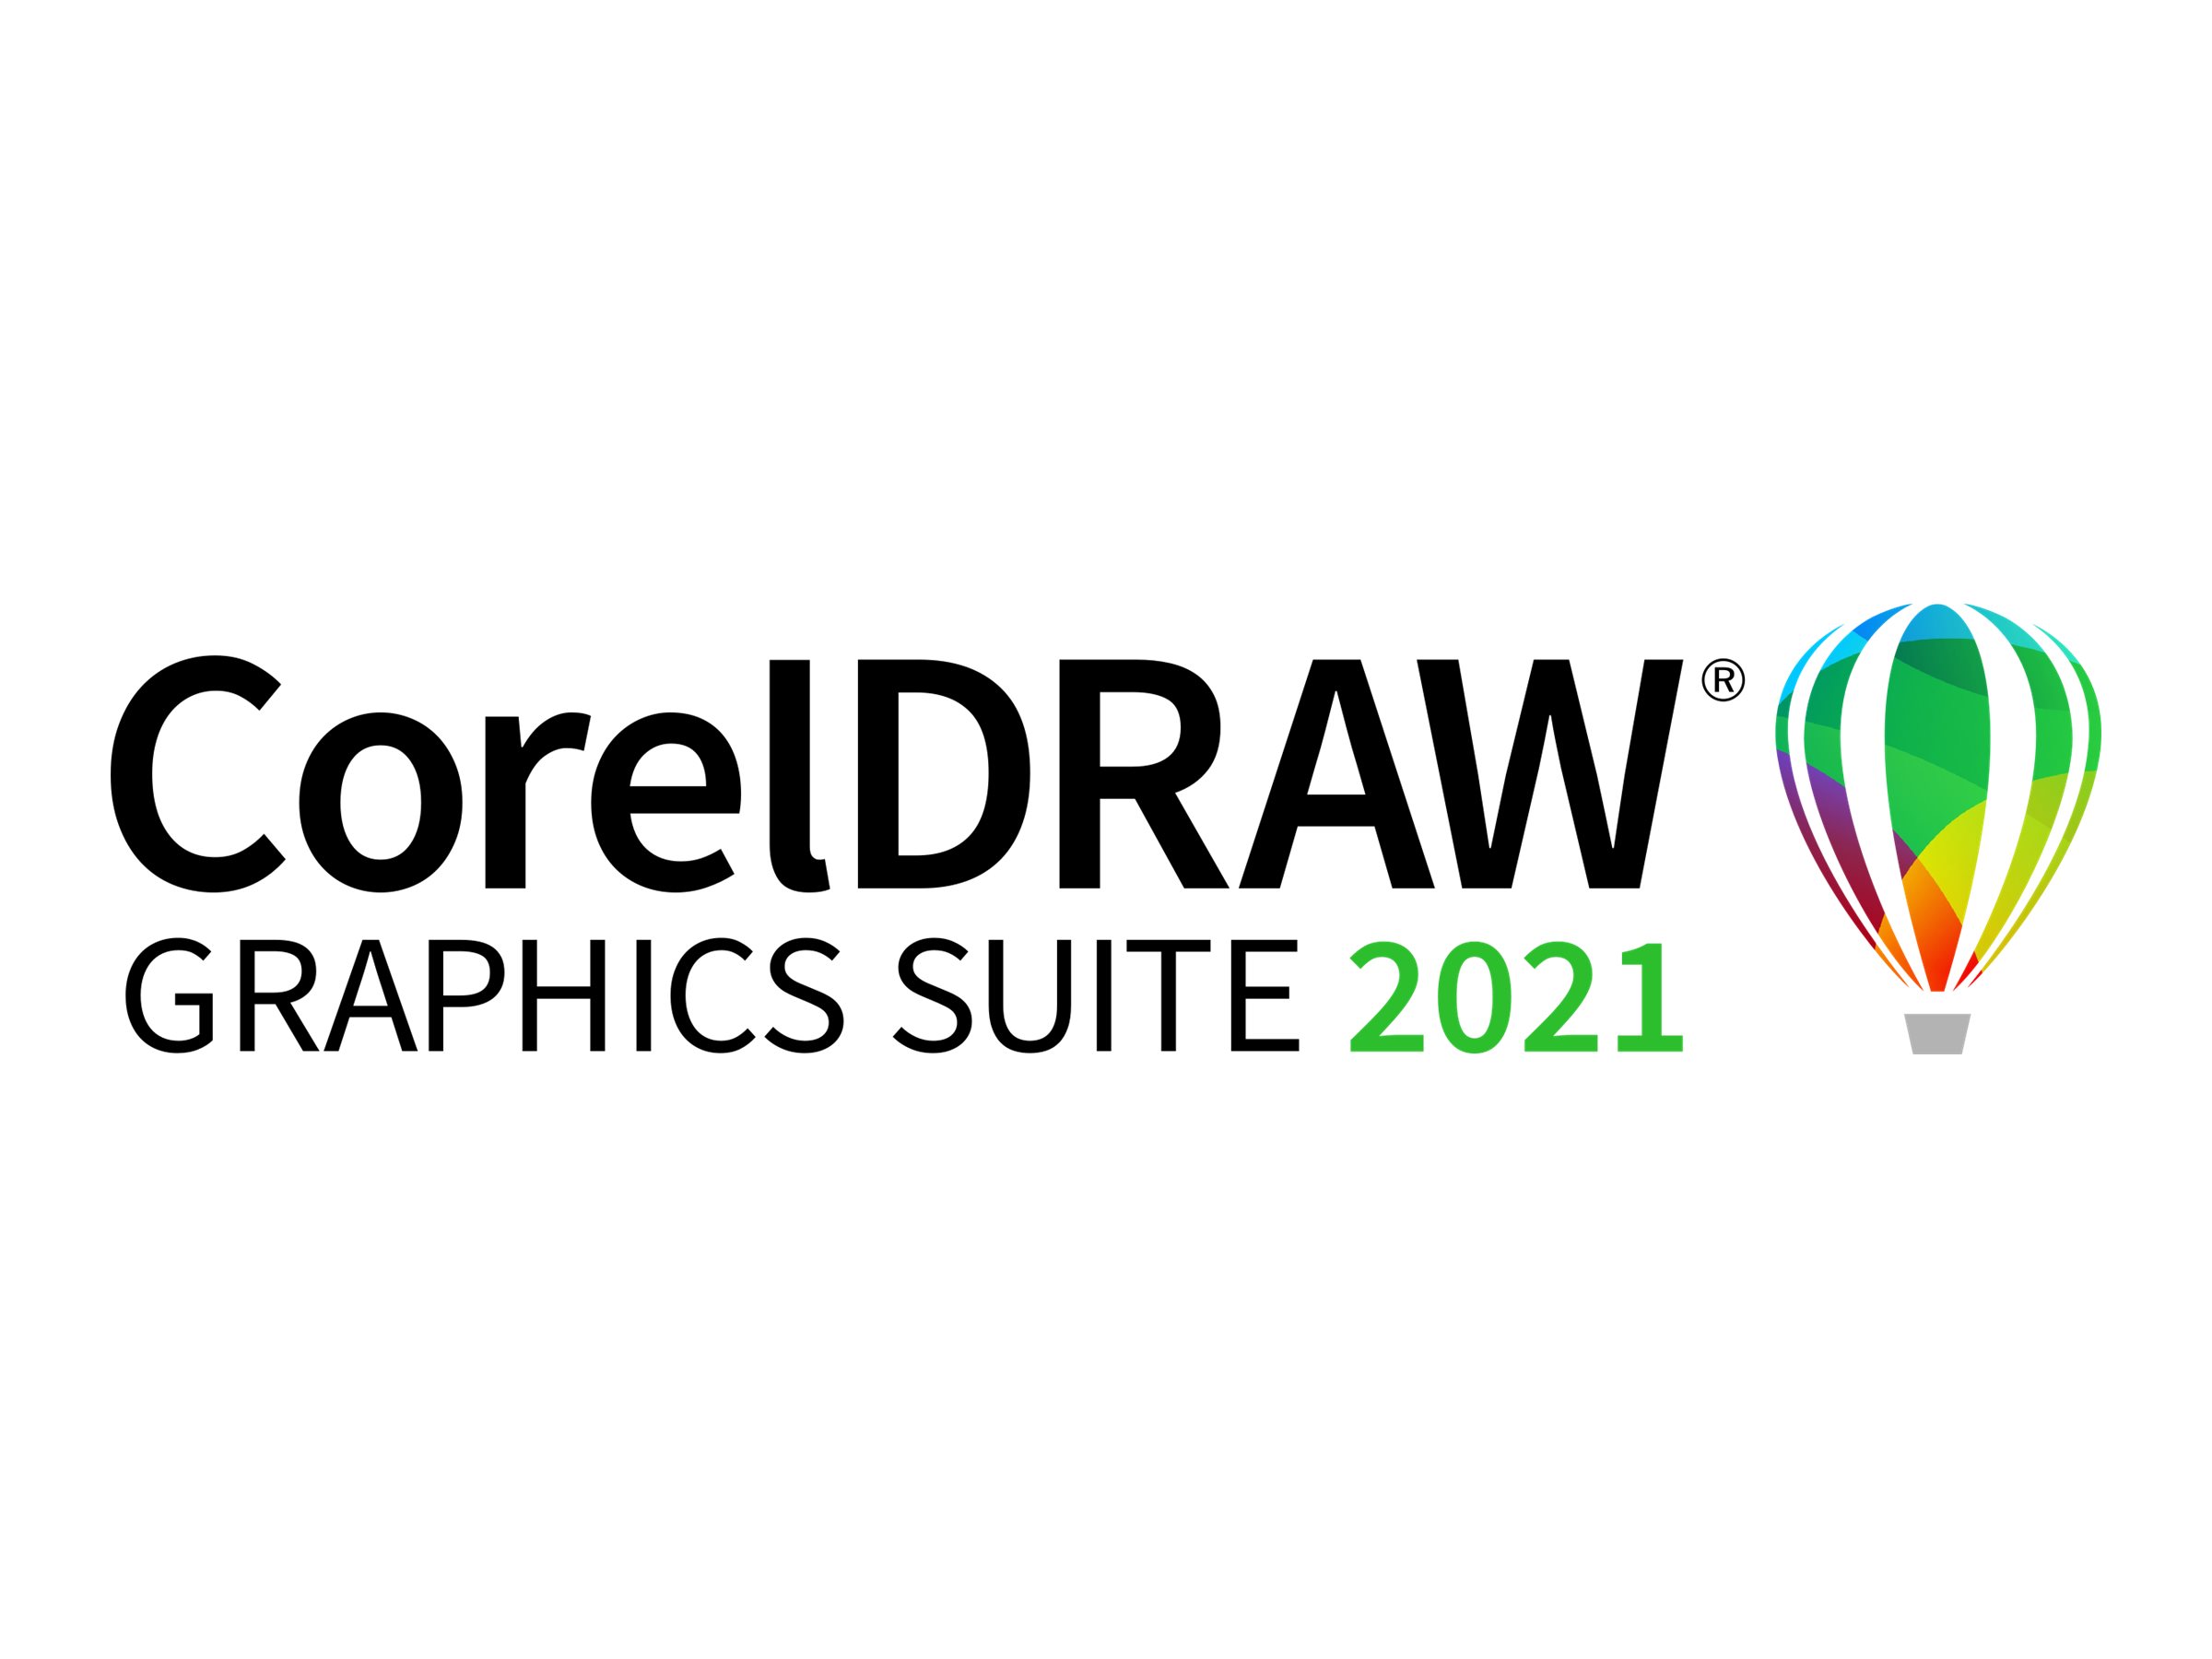 Corel Draw 2020 Full Version for Windows @ low price of Rs.99/- only